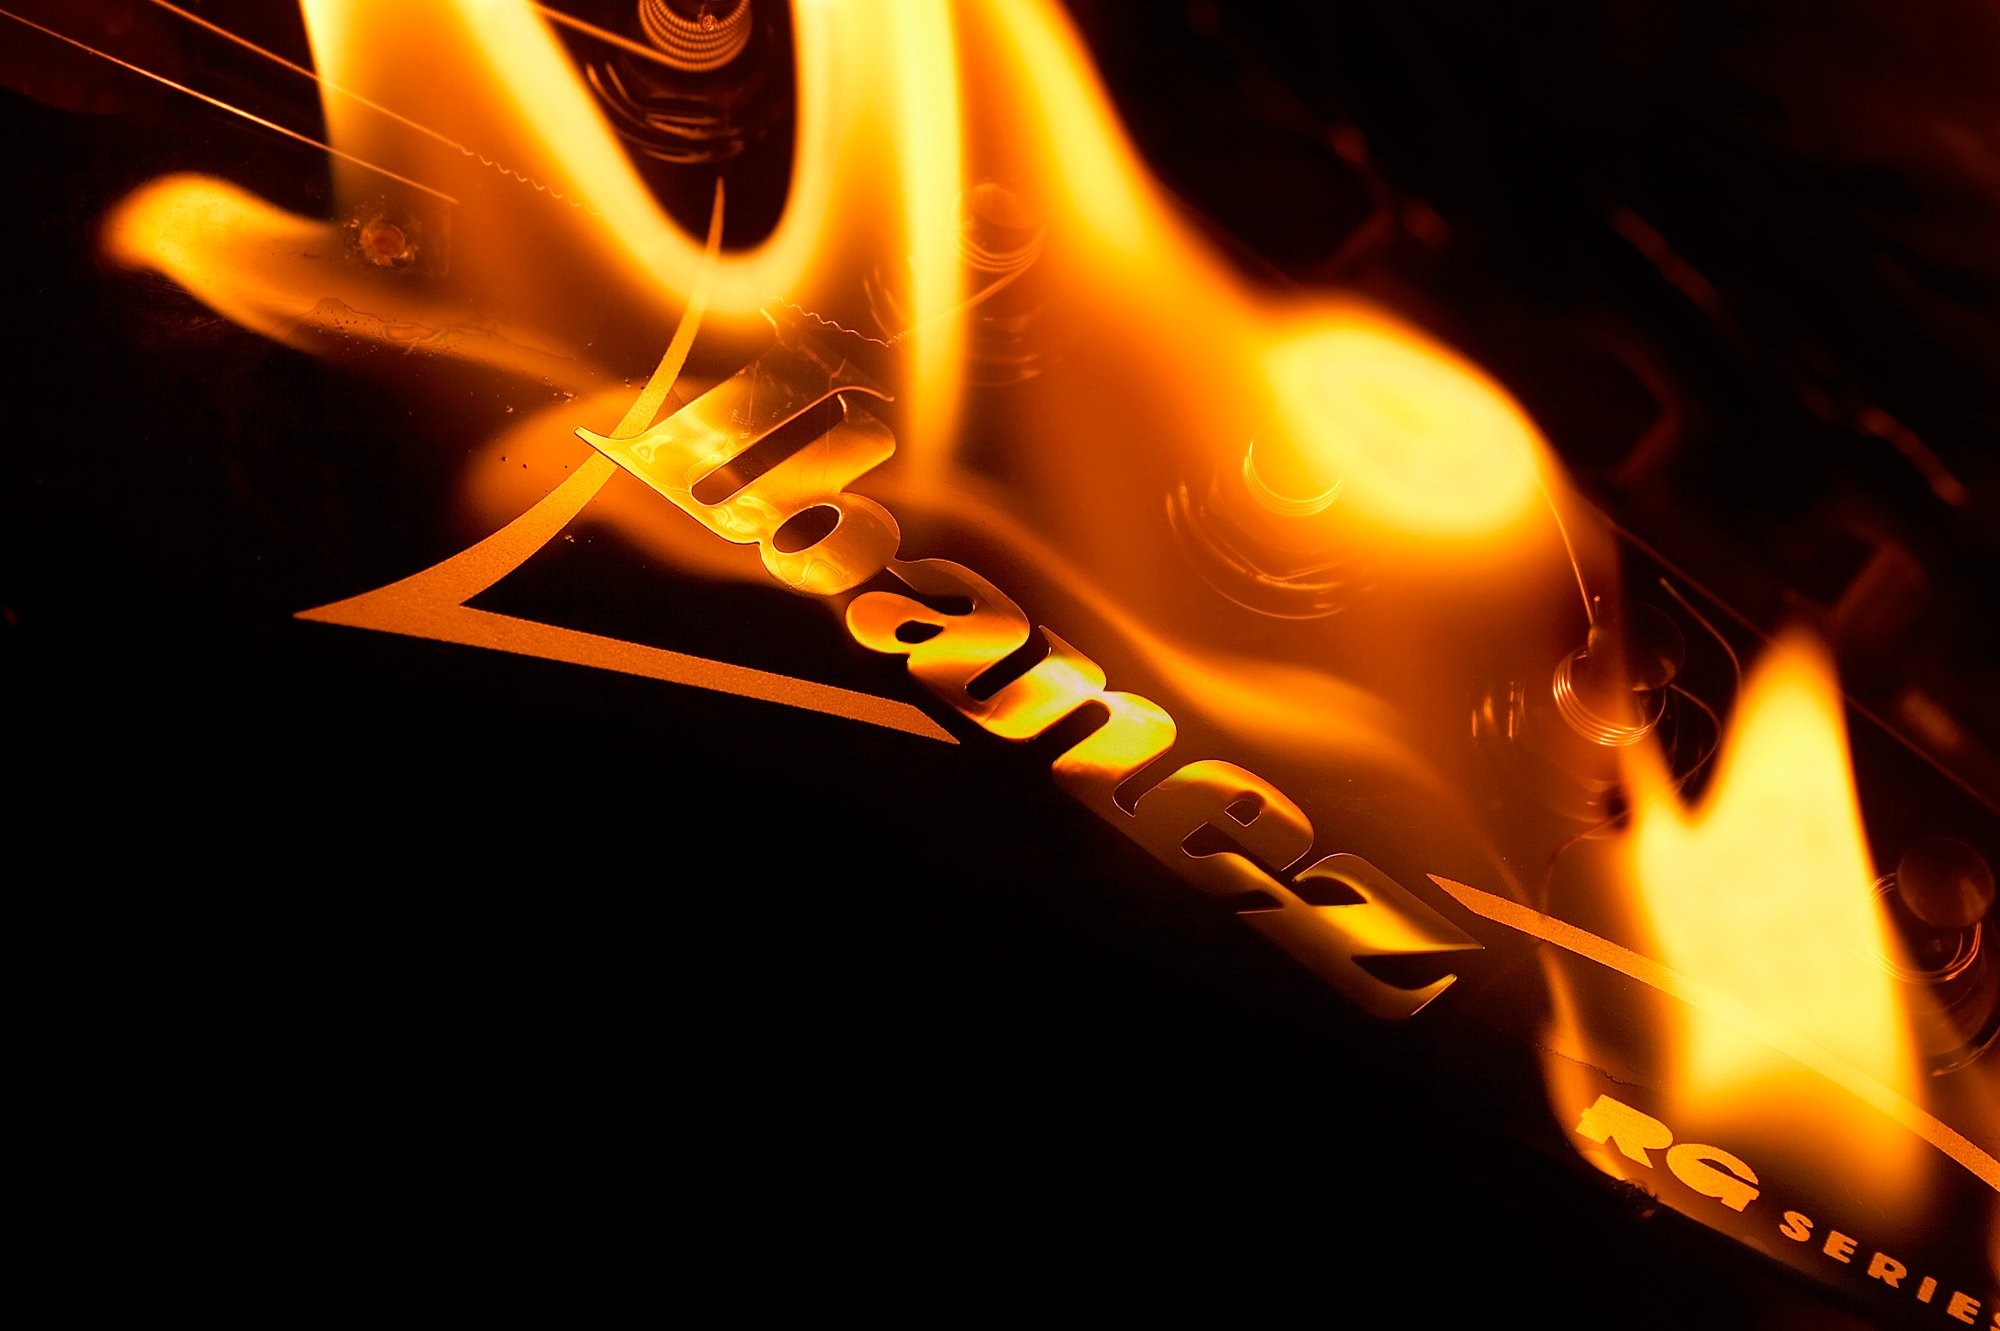 2000x1331 Amazing Ibanez Fire Music HD Wallpaper Picture Free .